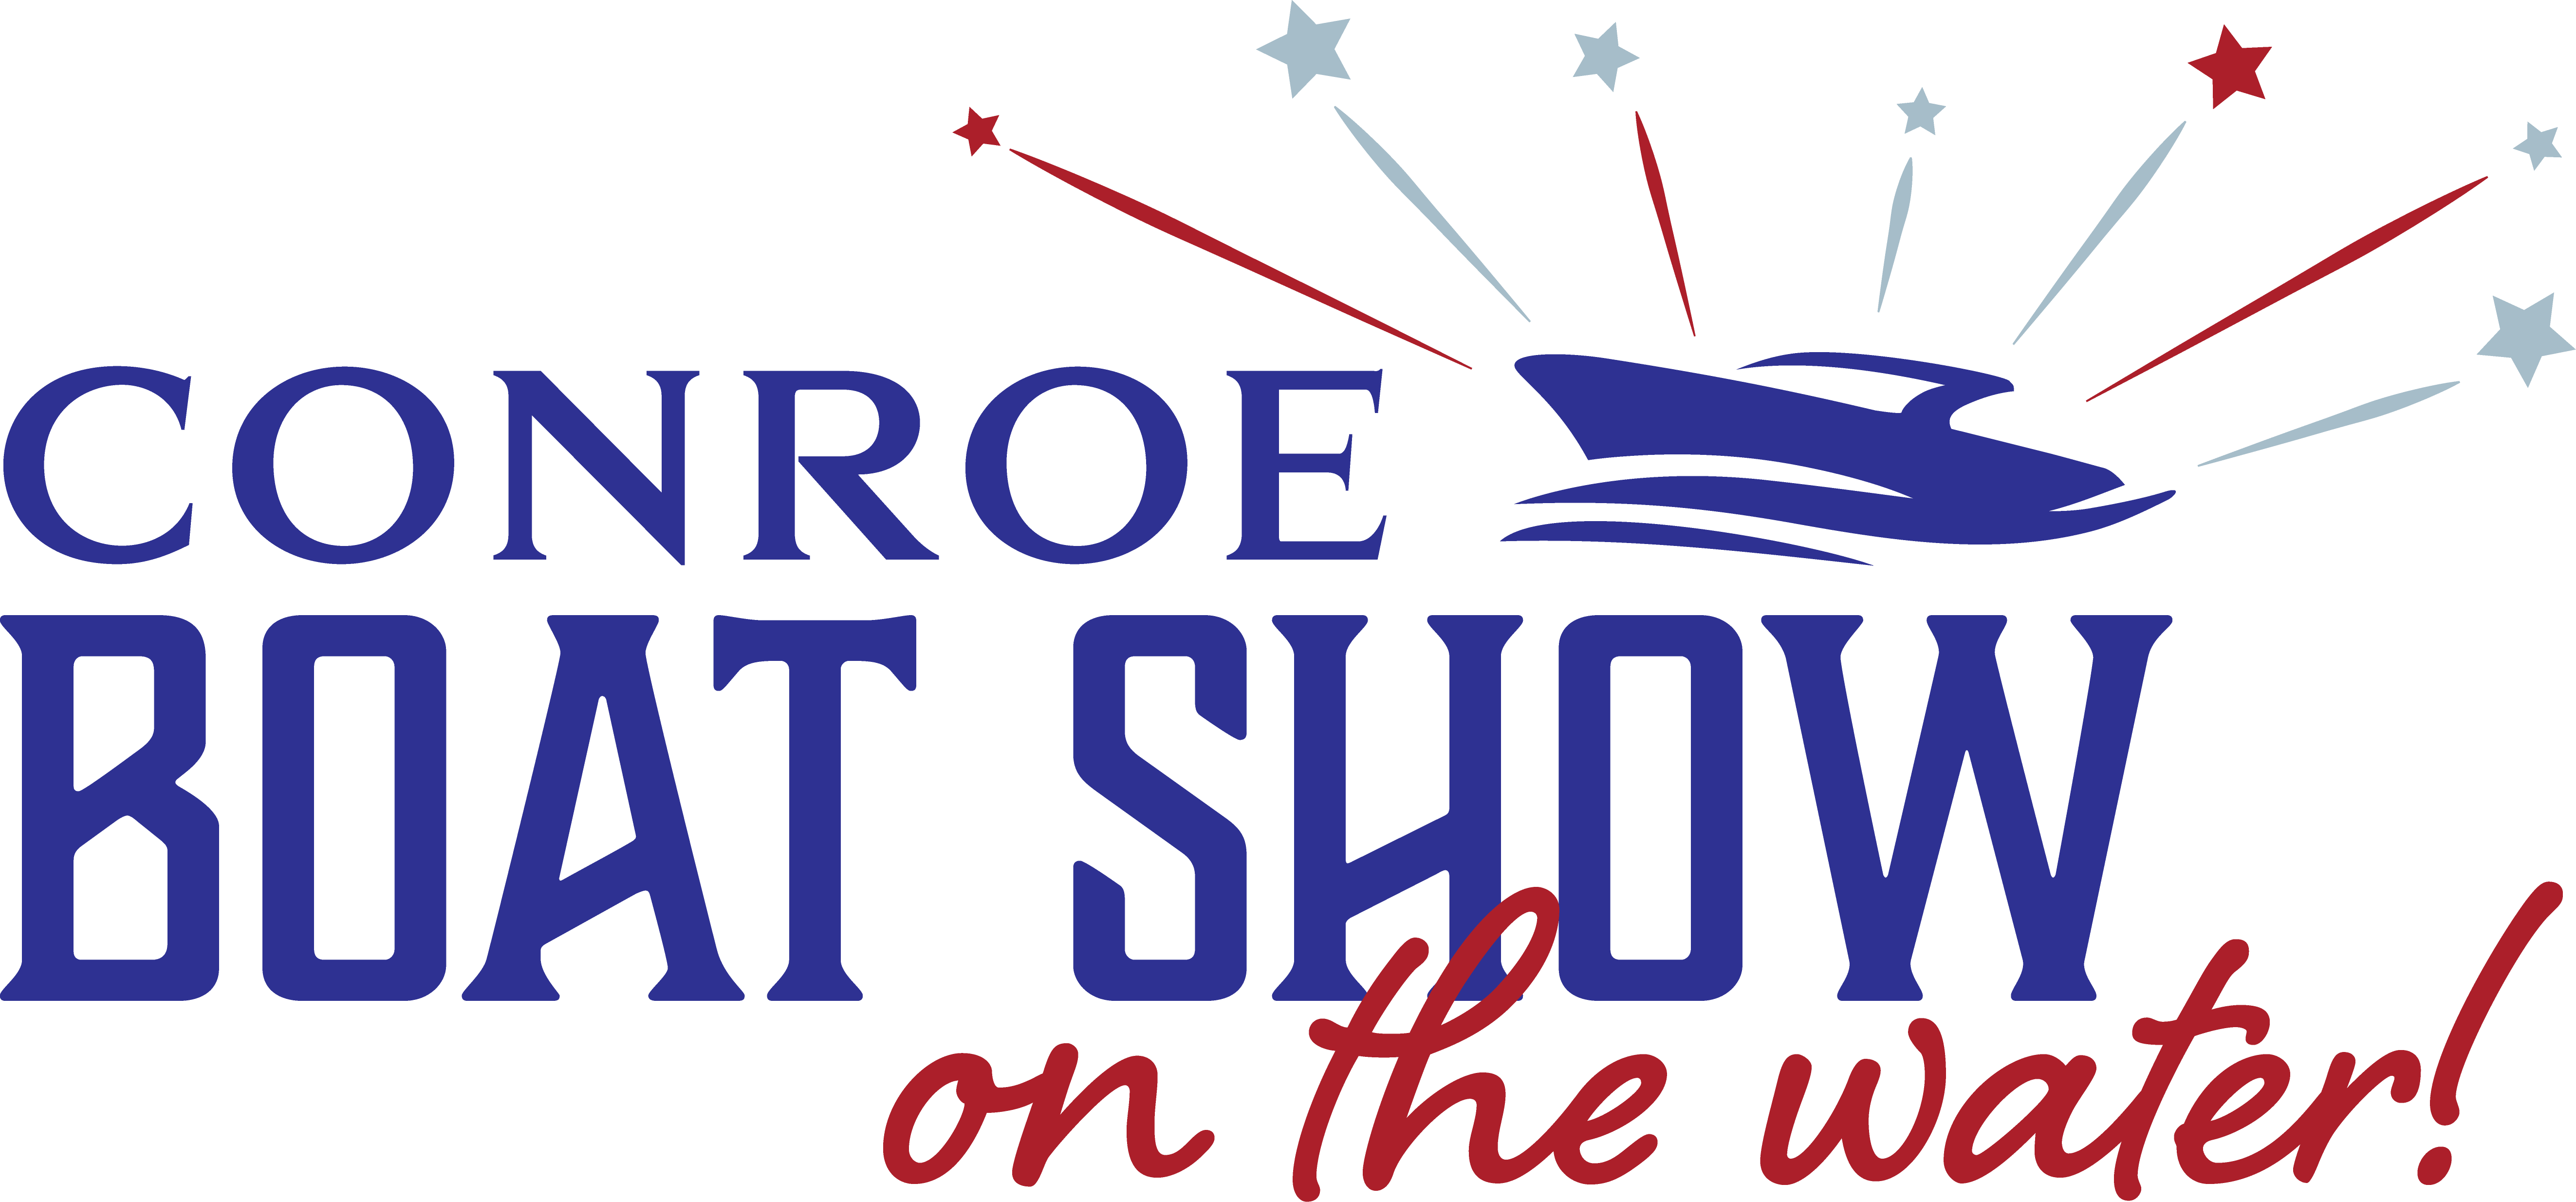 Conroe Boat Show Event Information Plan Your Visit in Conroe, TX